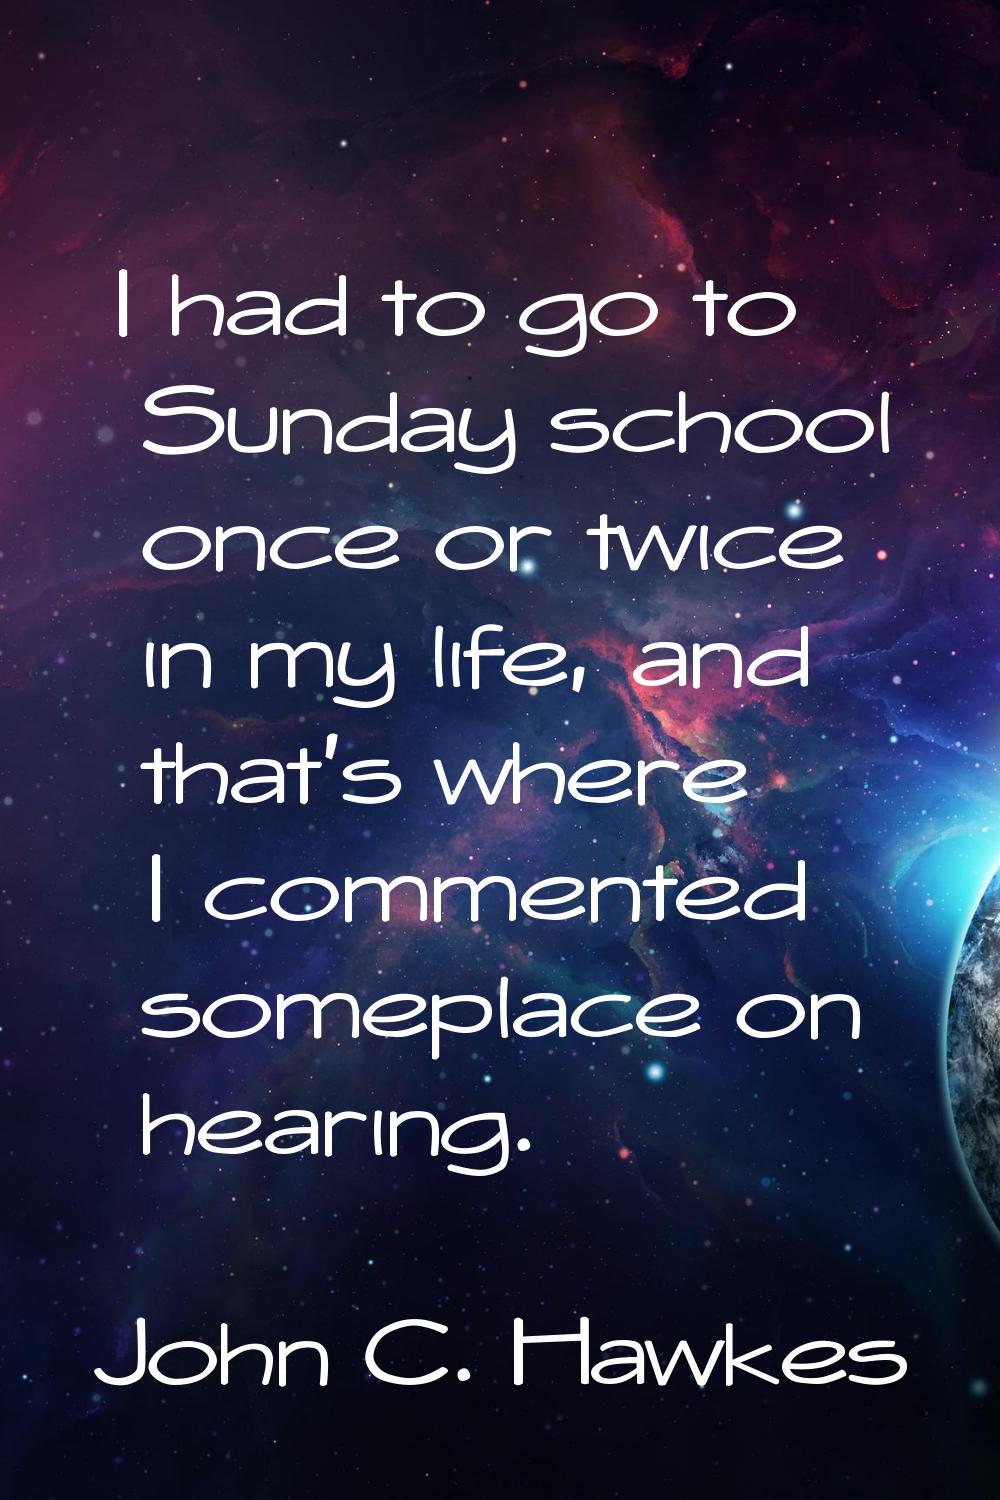 I had to go to Sunday school once or twice in my life, and that's where I commented someplace on he